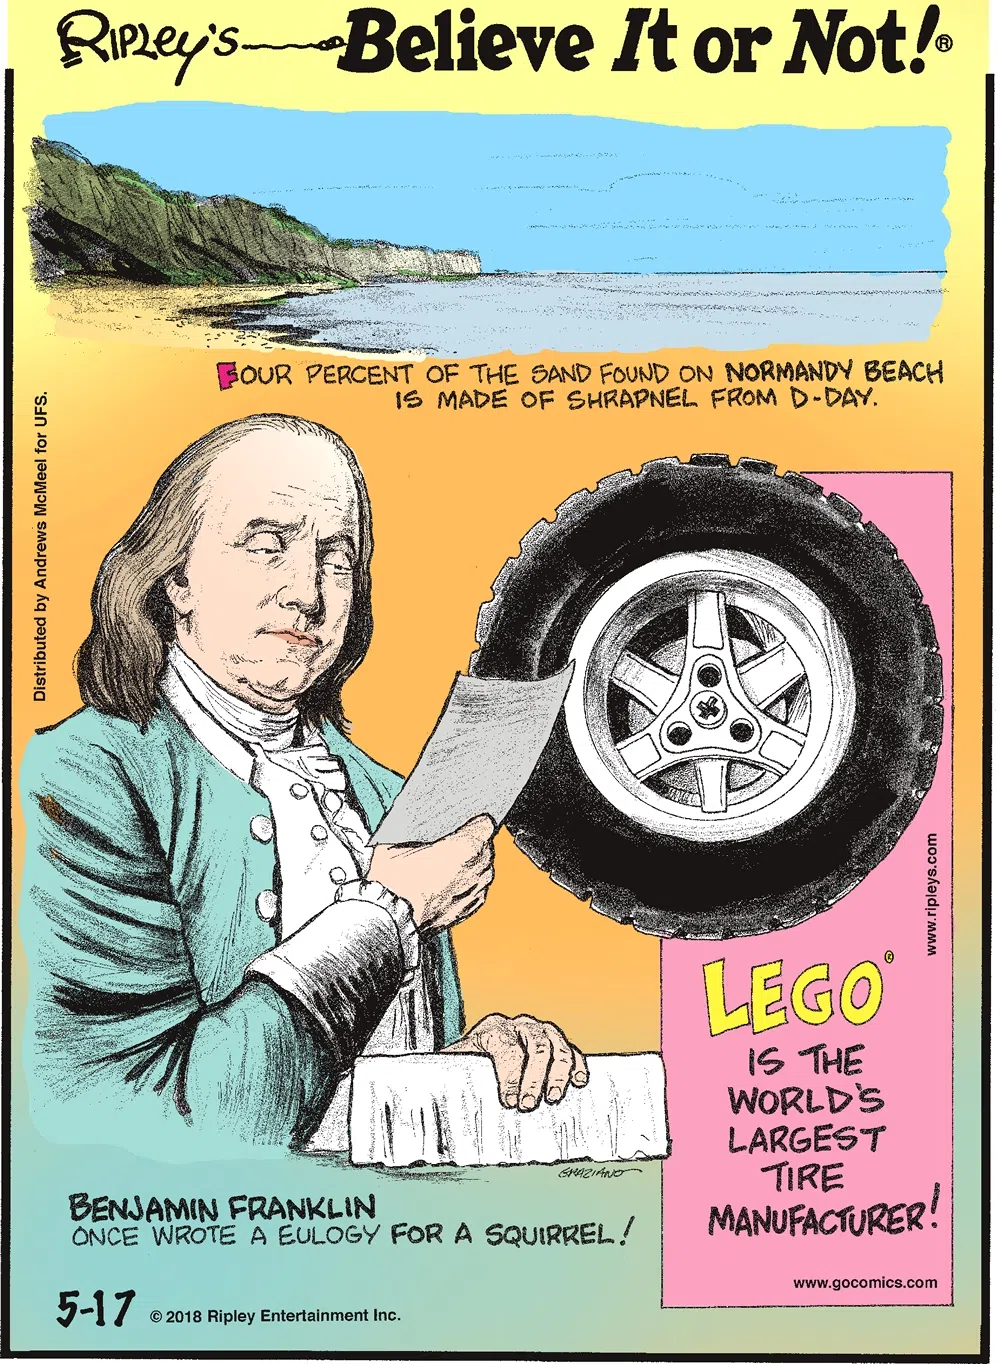 Four percent of the sand found on Normandy Beach is made of shrapnel from D-Day.-------------------- Benjamin Franklin once wrote a eulogy for a squirrel!-------------------- LEGO is the world's largest tire manufacturer!